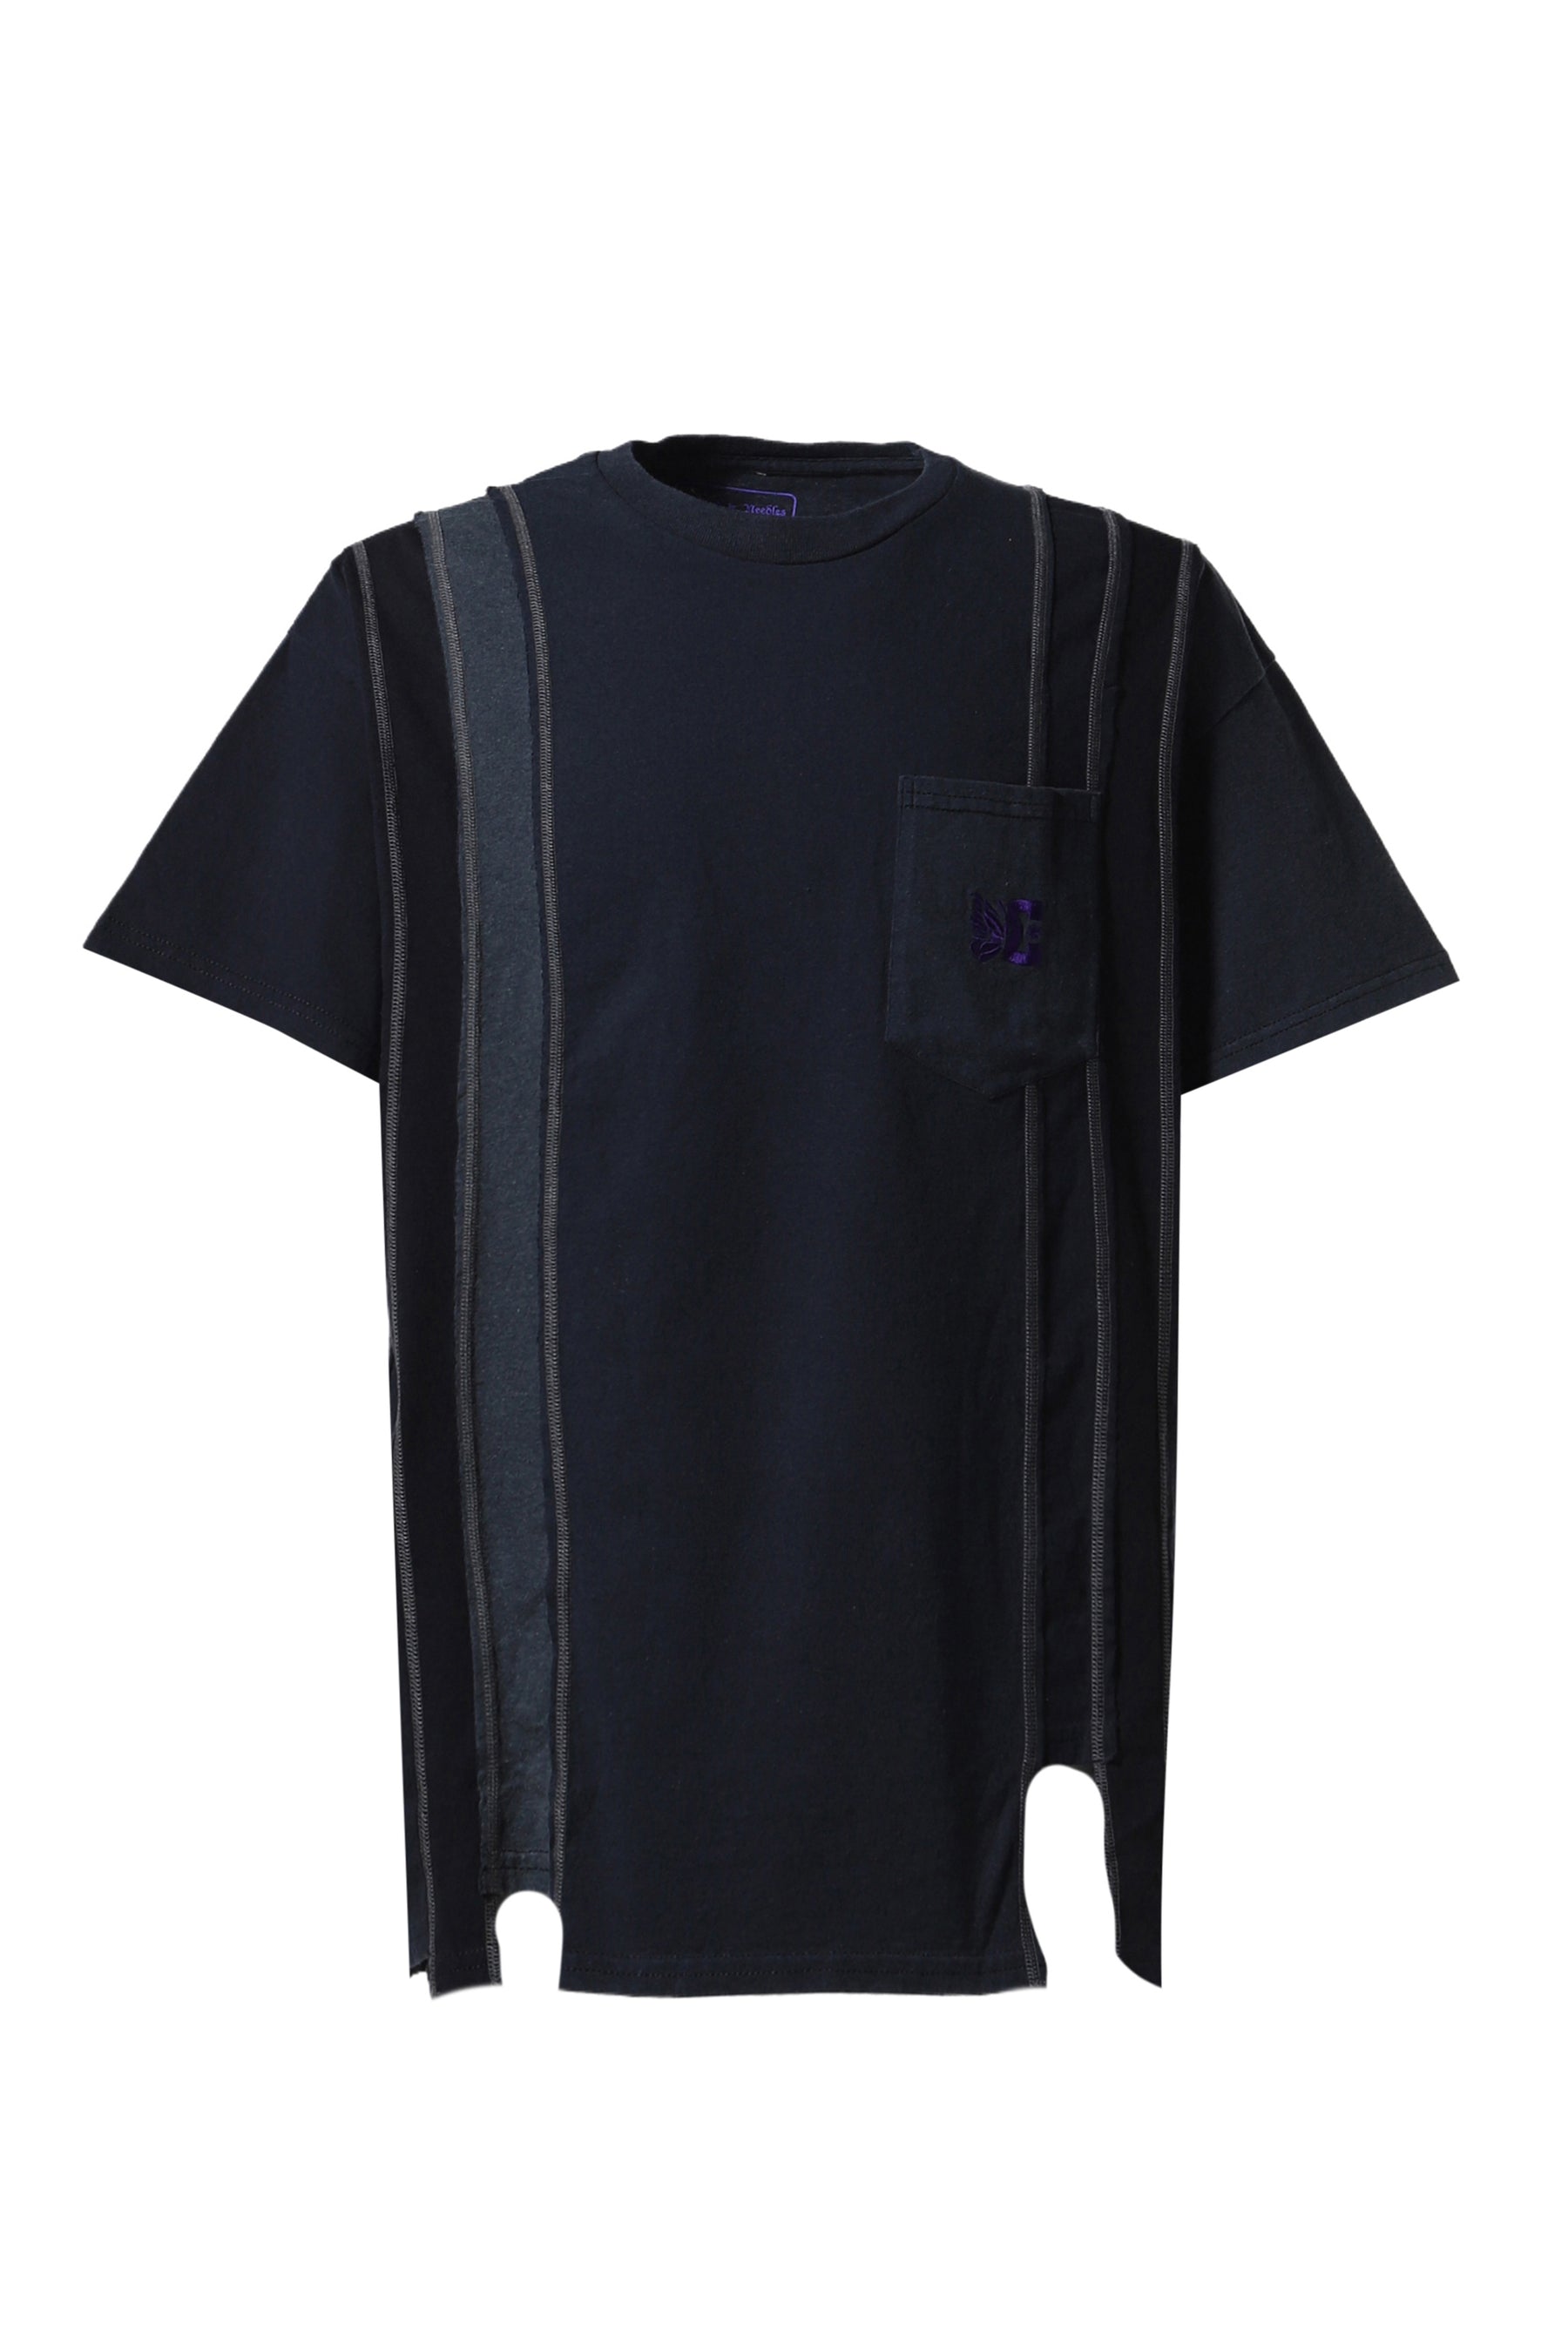 7 CUTS S/S TEE - SOLID / FADE / BLK